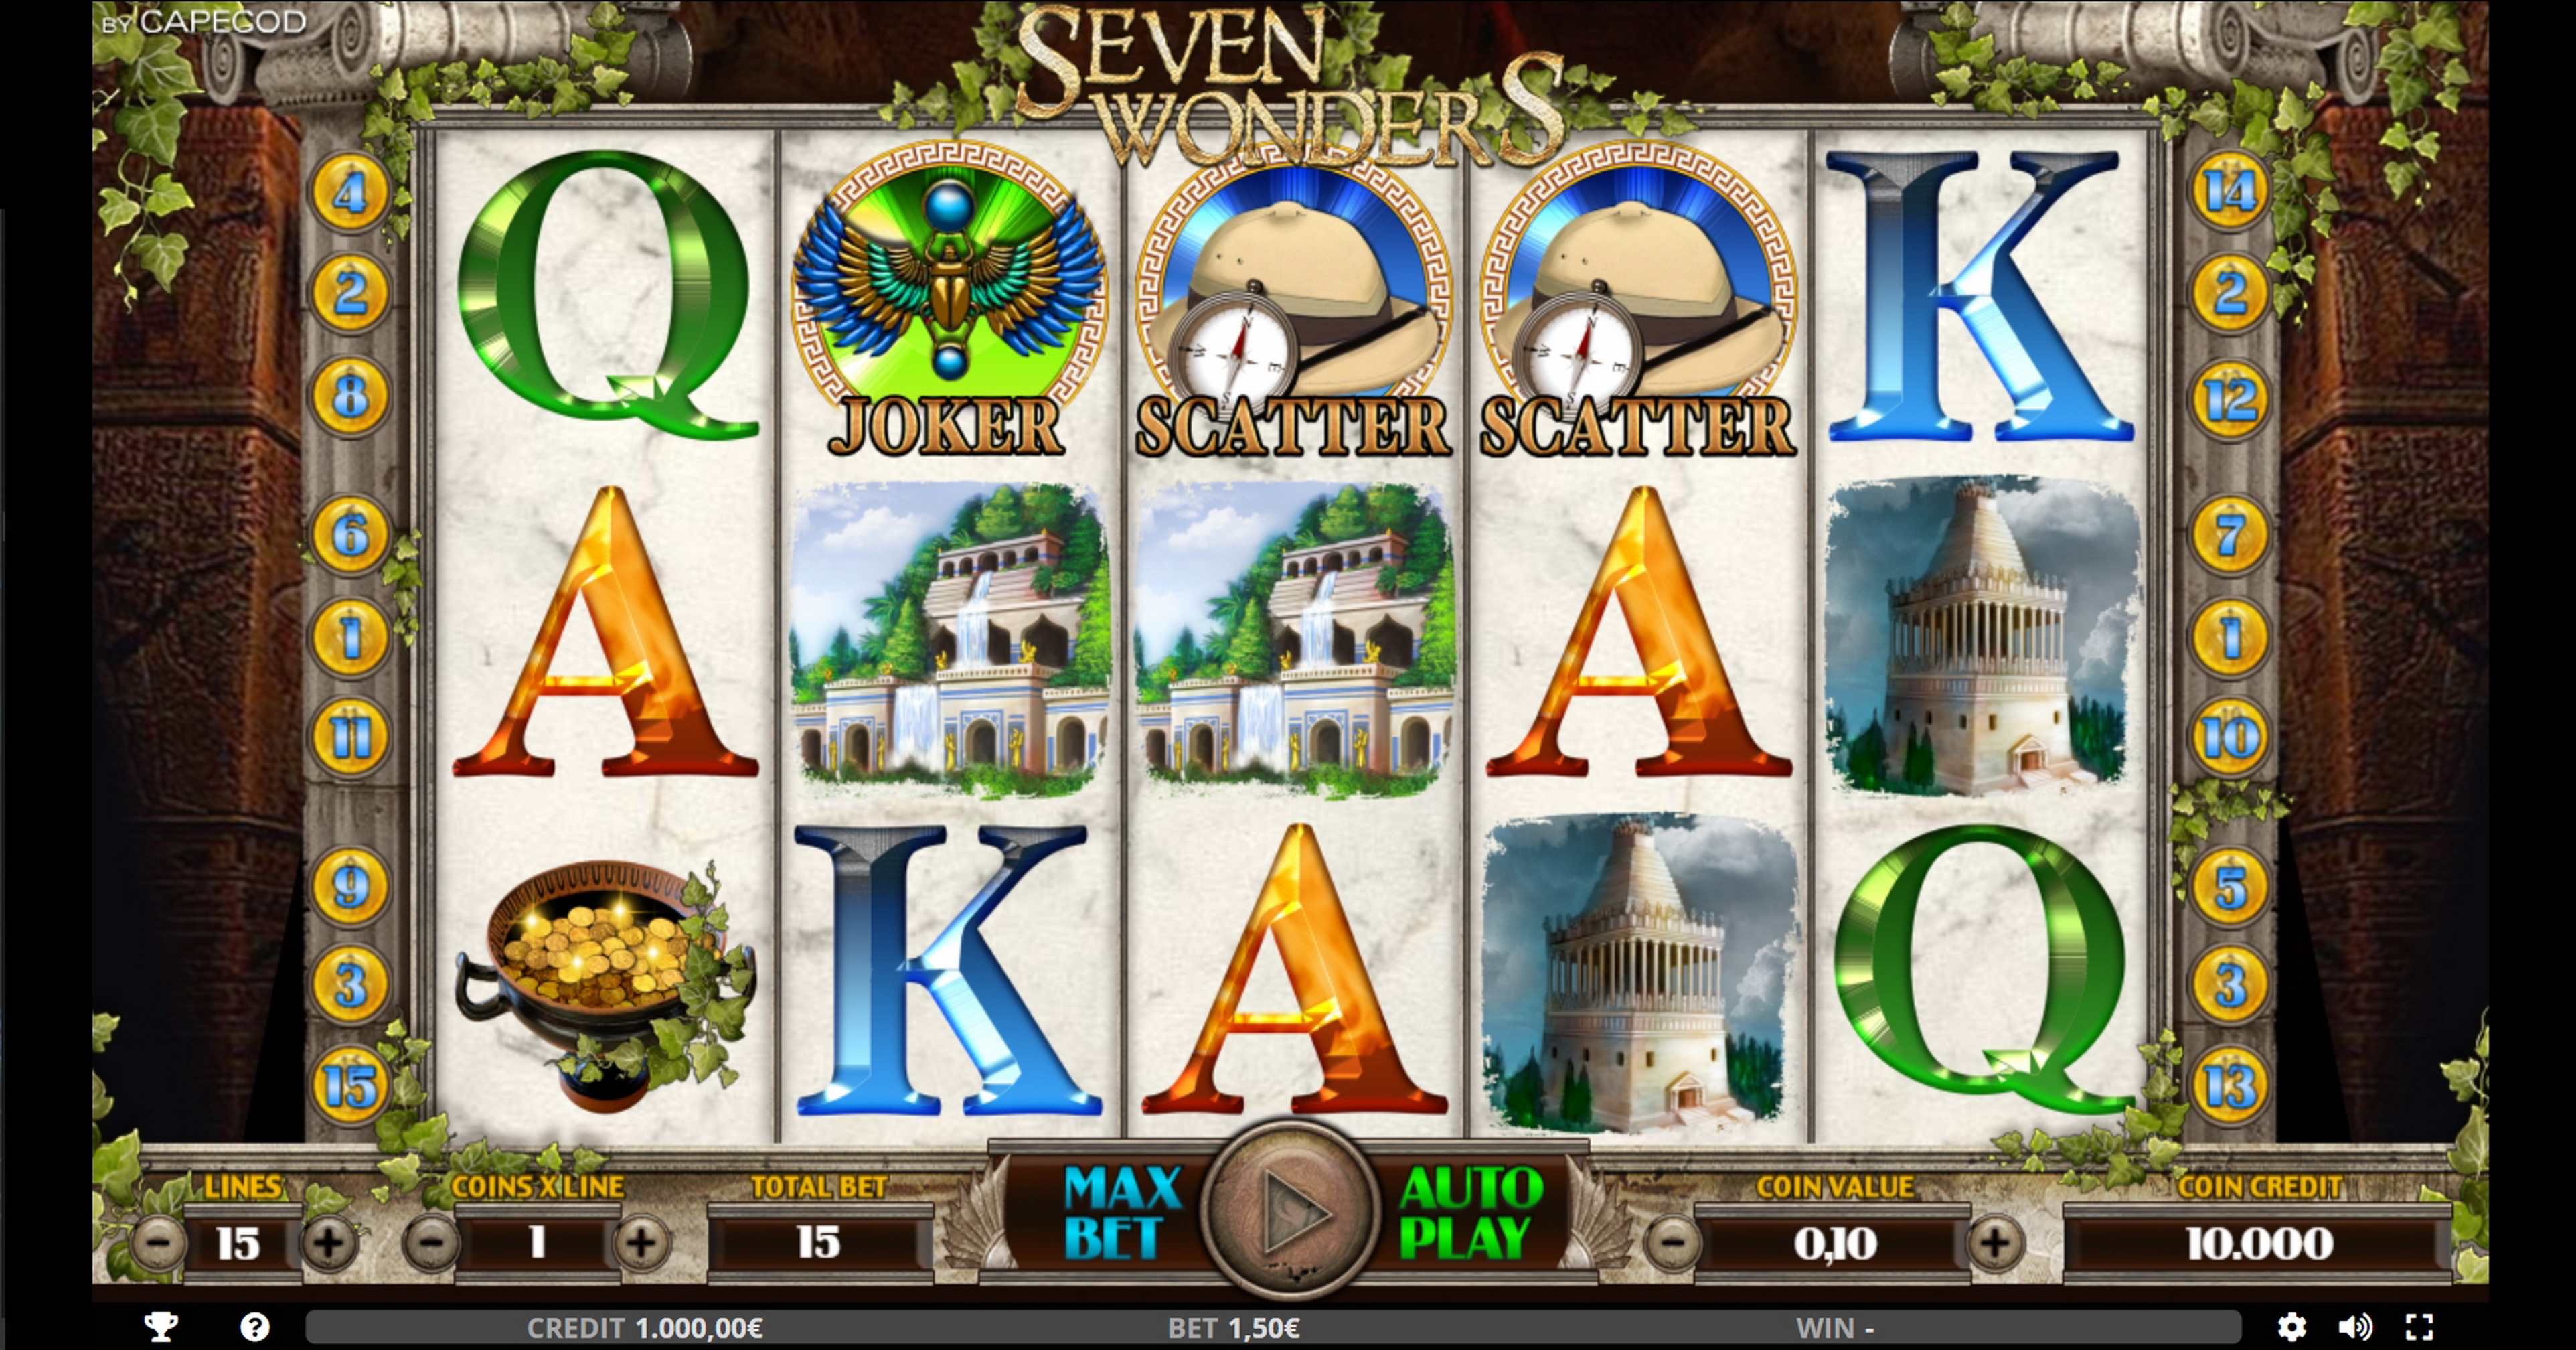 Reels in Seven Wonders Slot Game by Capecod Gaming